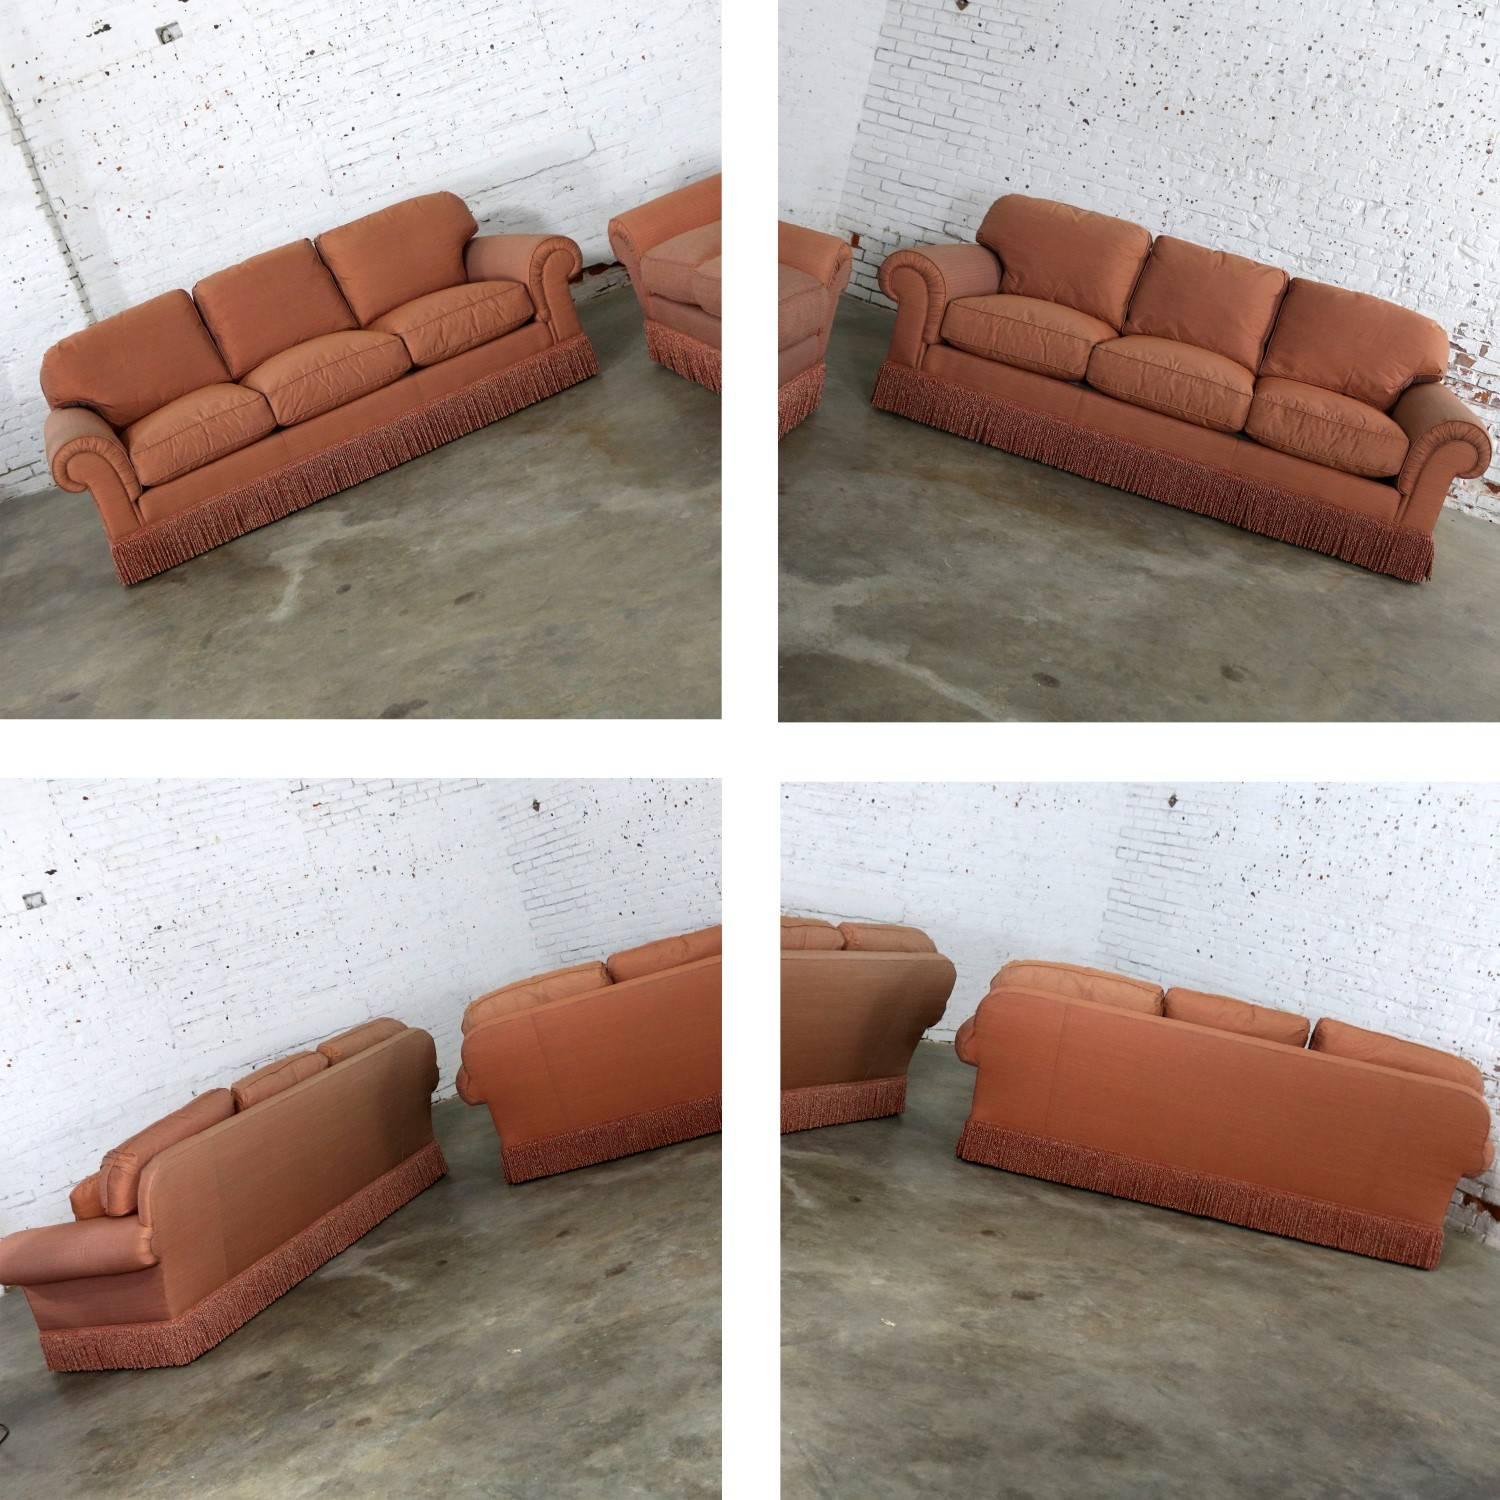 Beautiful Baker Furniture Lawson style sofas from their Crown and Tulip collection in a gorgeous terracotta / peach / coral colored ribbed tight weave taffeta-like heavy upholstery fabric with bouillon fringe and poly / feather / down pillows and